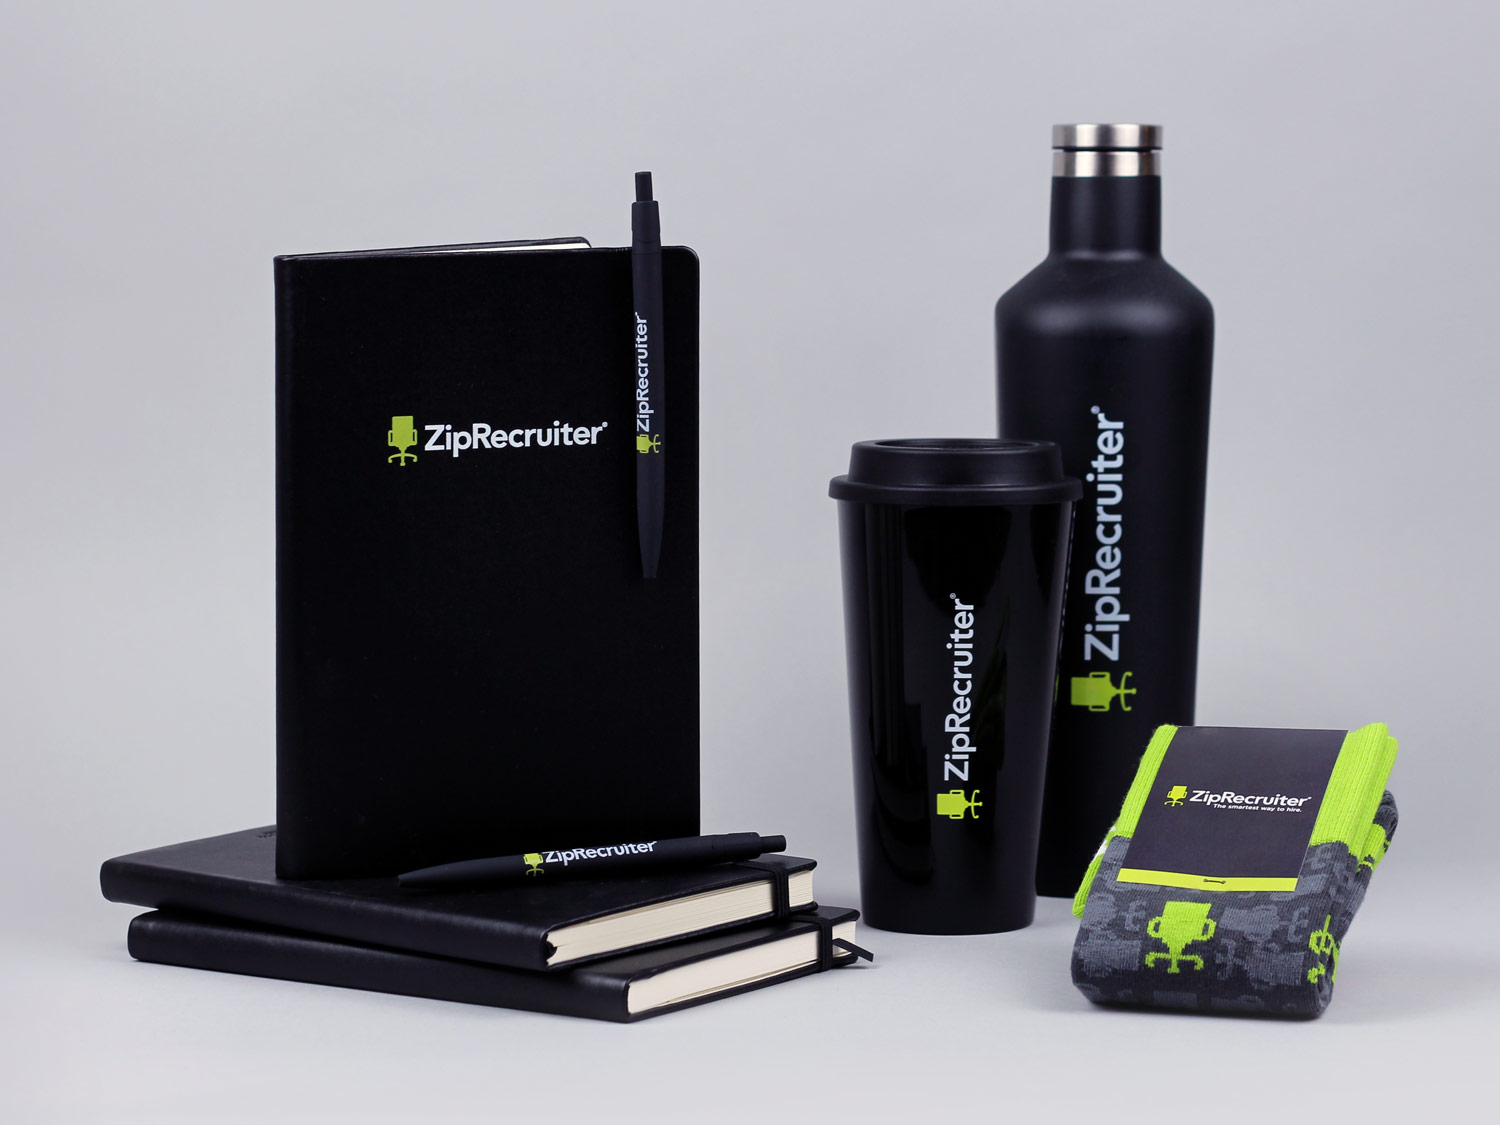 Promotional Products and Branded Merchandise